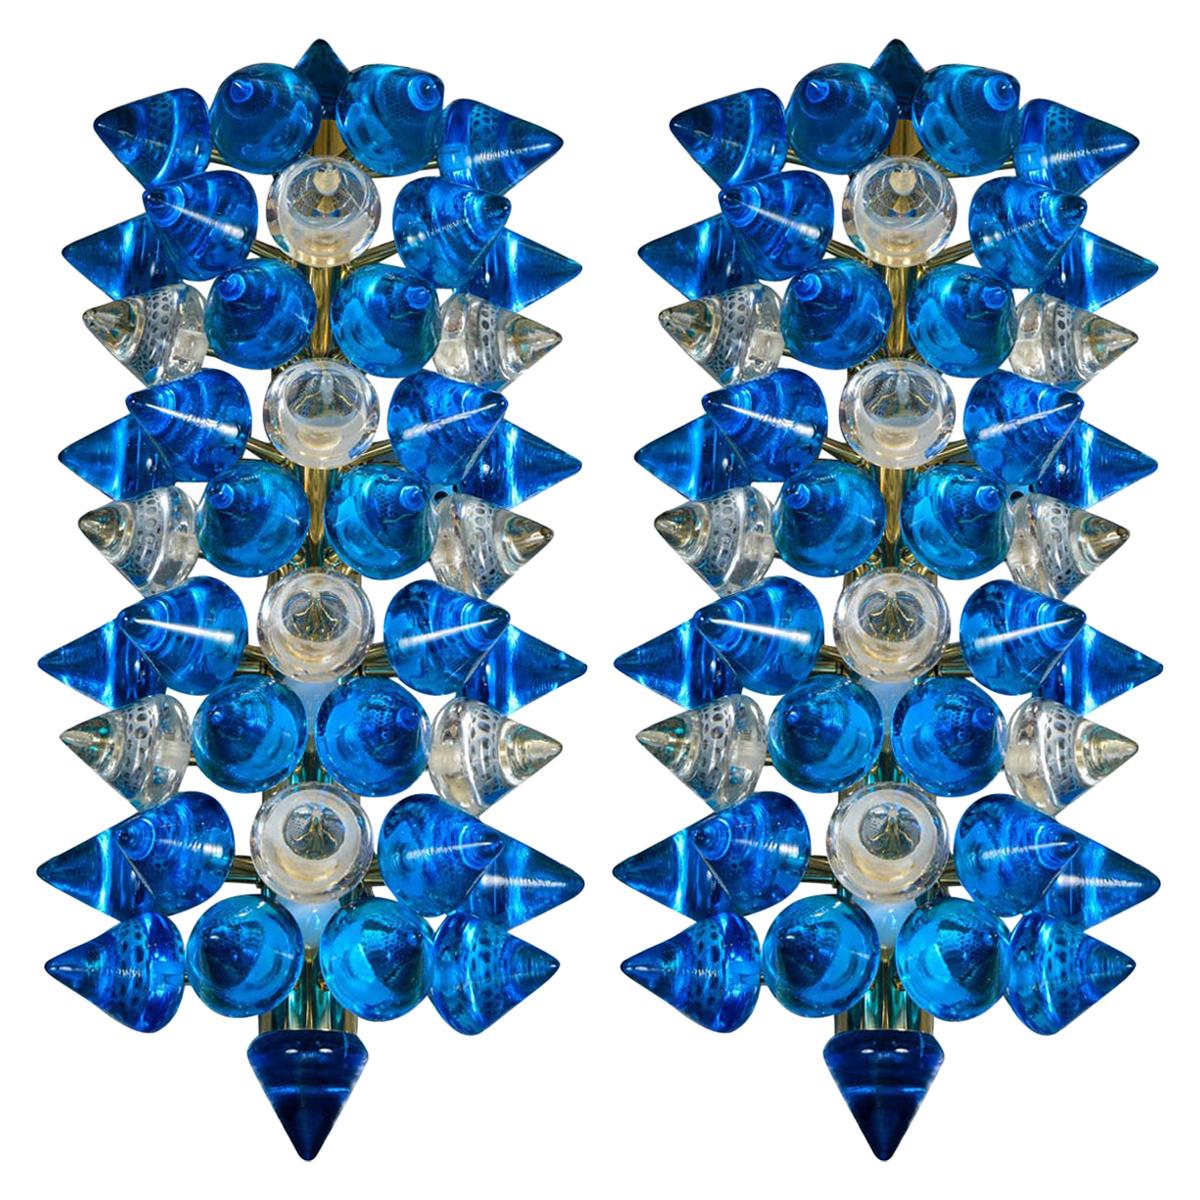 Pair of Murano Glass Sconces Designed by Regis Royant